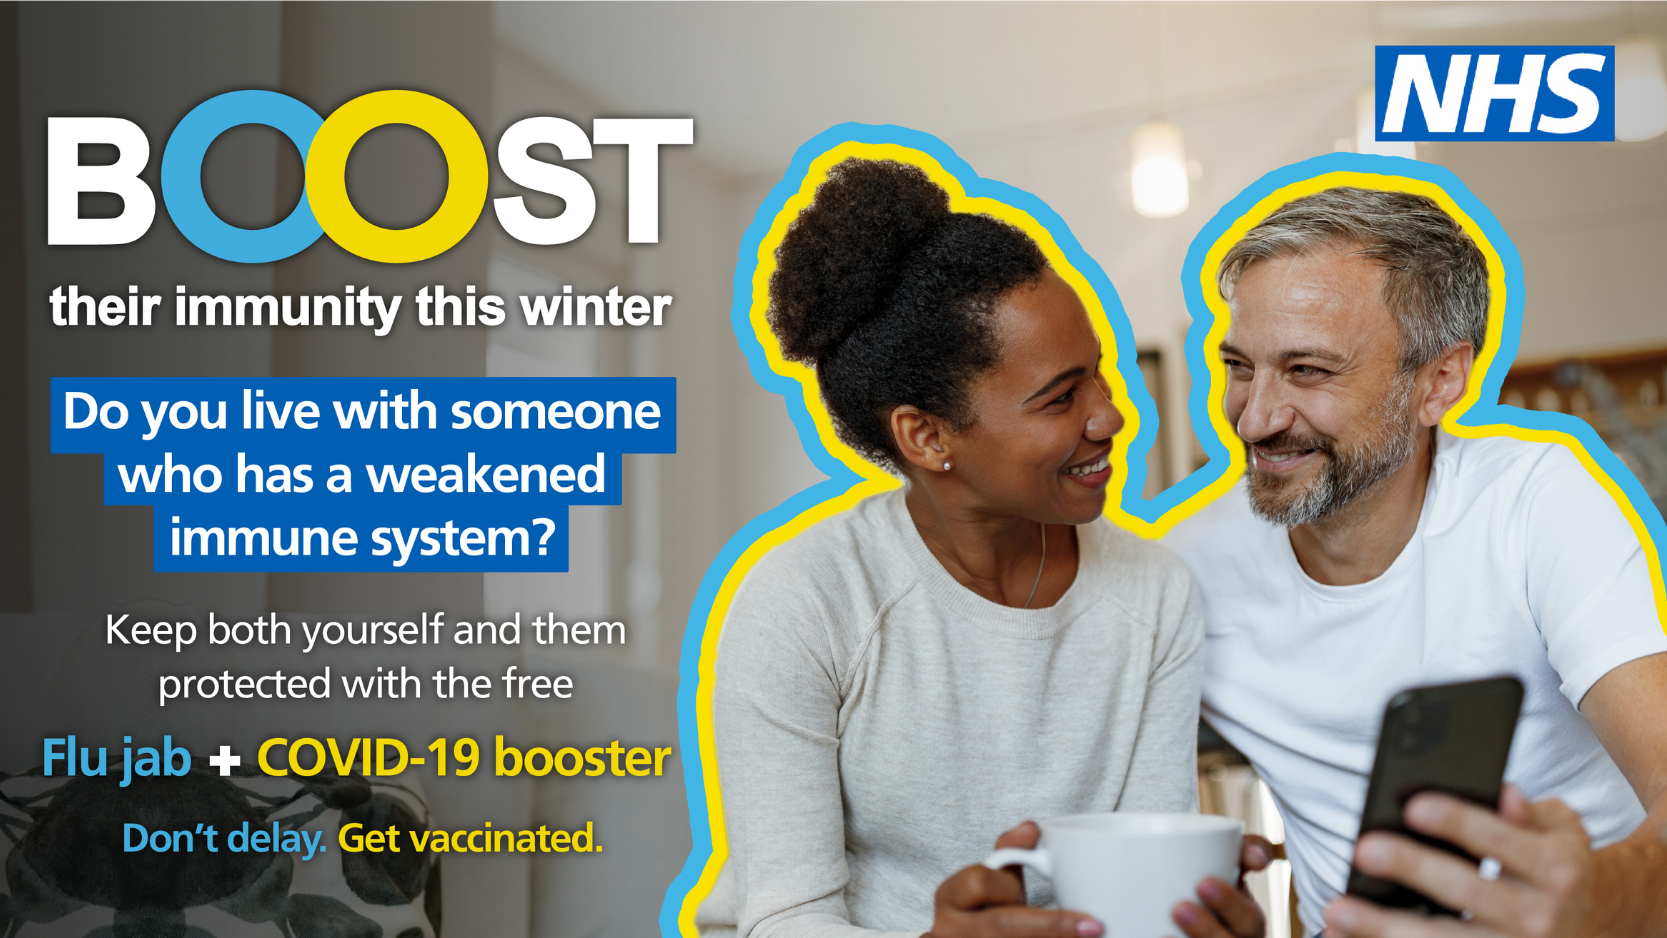 Boost their immunity this winter. Do you live with someone who has a weakened immune system? Keep both yourself and them protected with the free flu jab and covid-19 booster.  Don't delay get vaccinated.